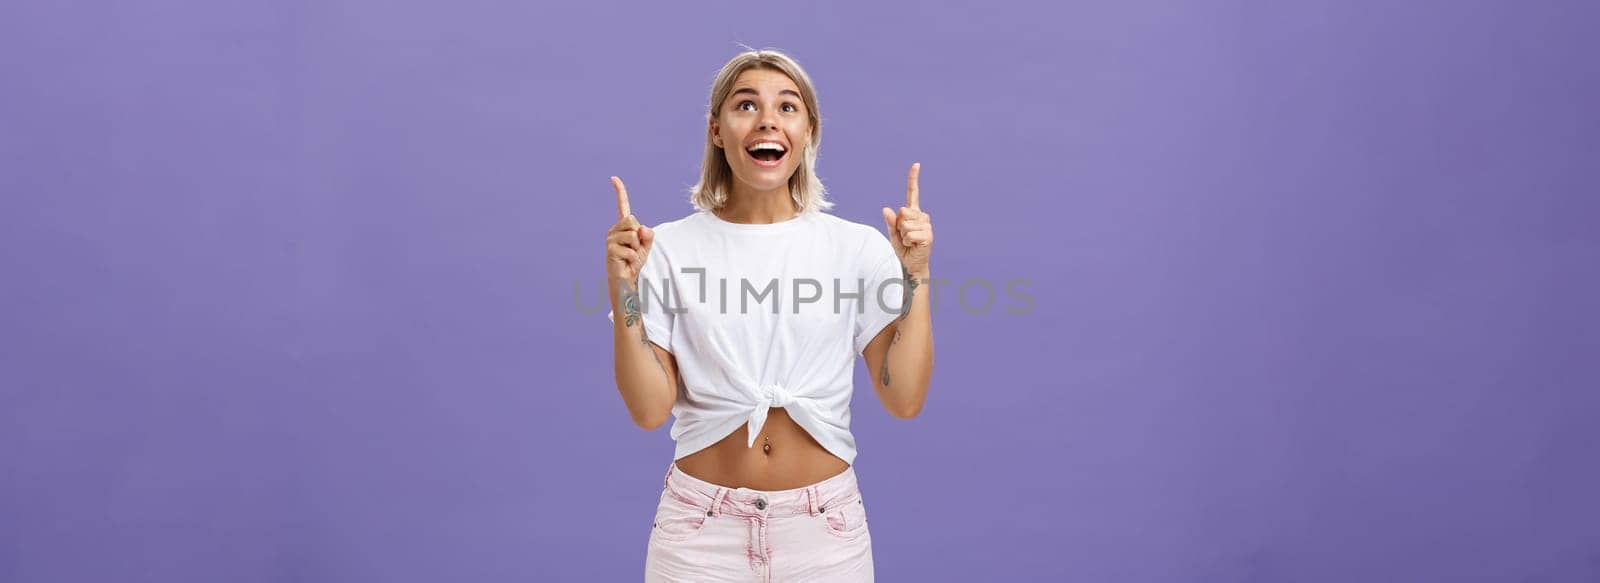 Lifestyle. Woman seeing miracle being impressed and delighted like child staring and pointing up with broad thrilled smile standing over purple background in summer trendy outfit being joyful and excited.